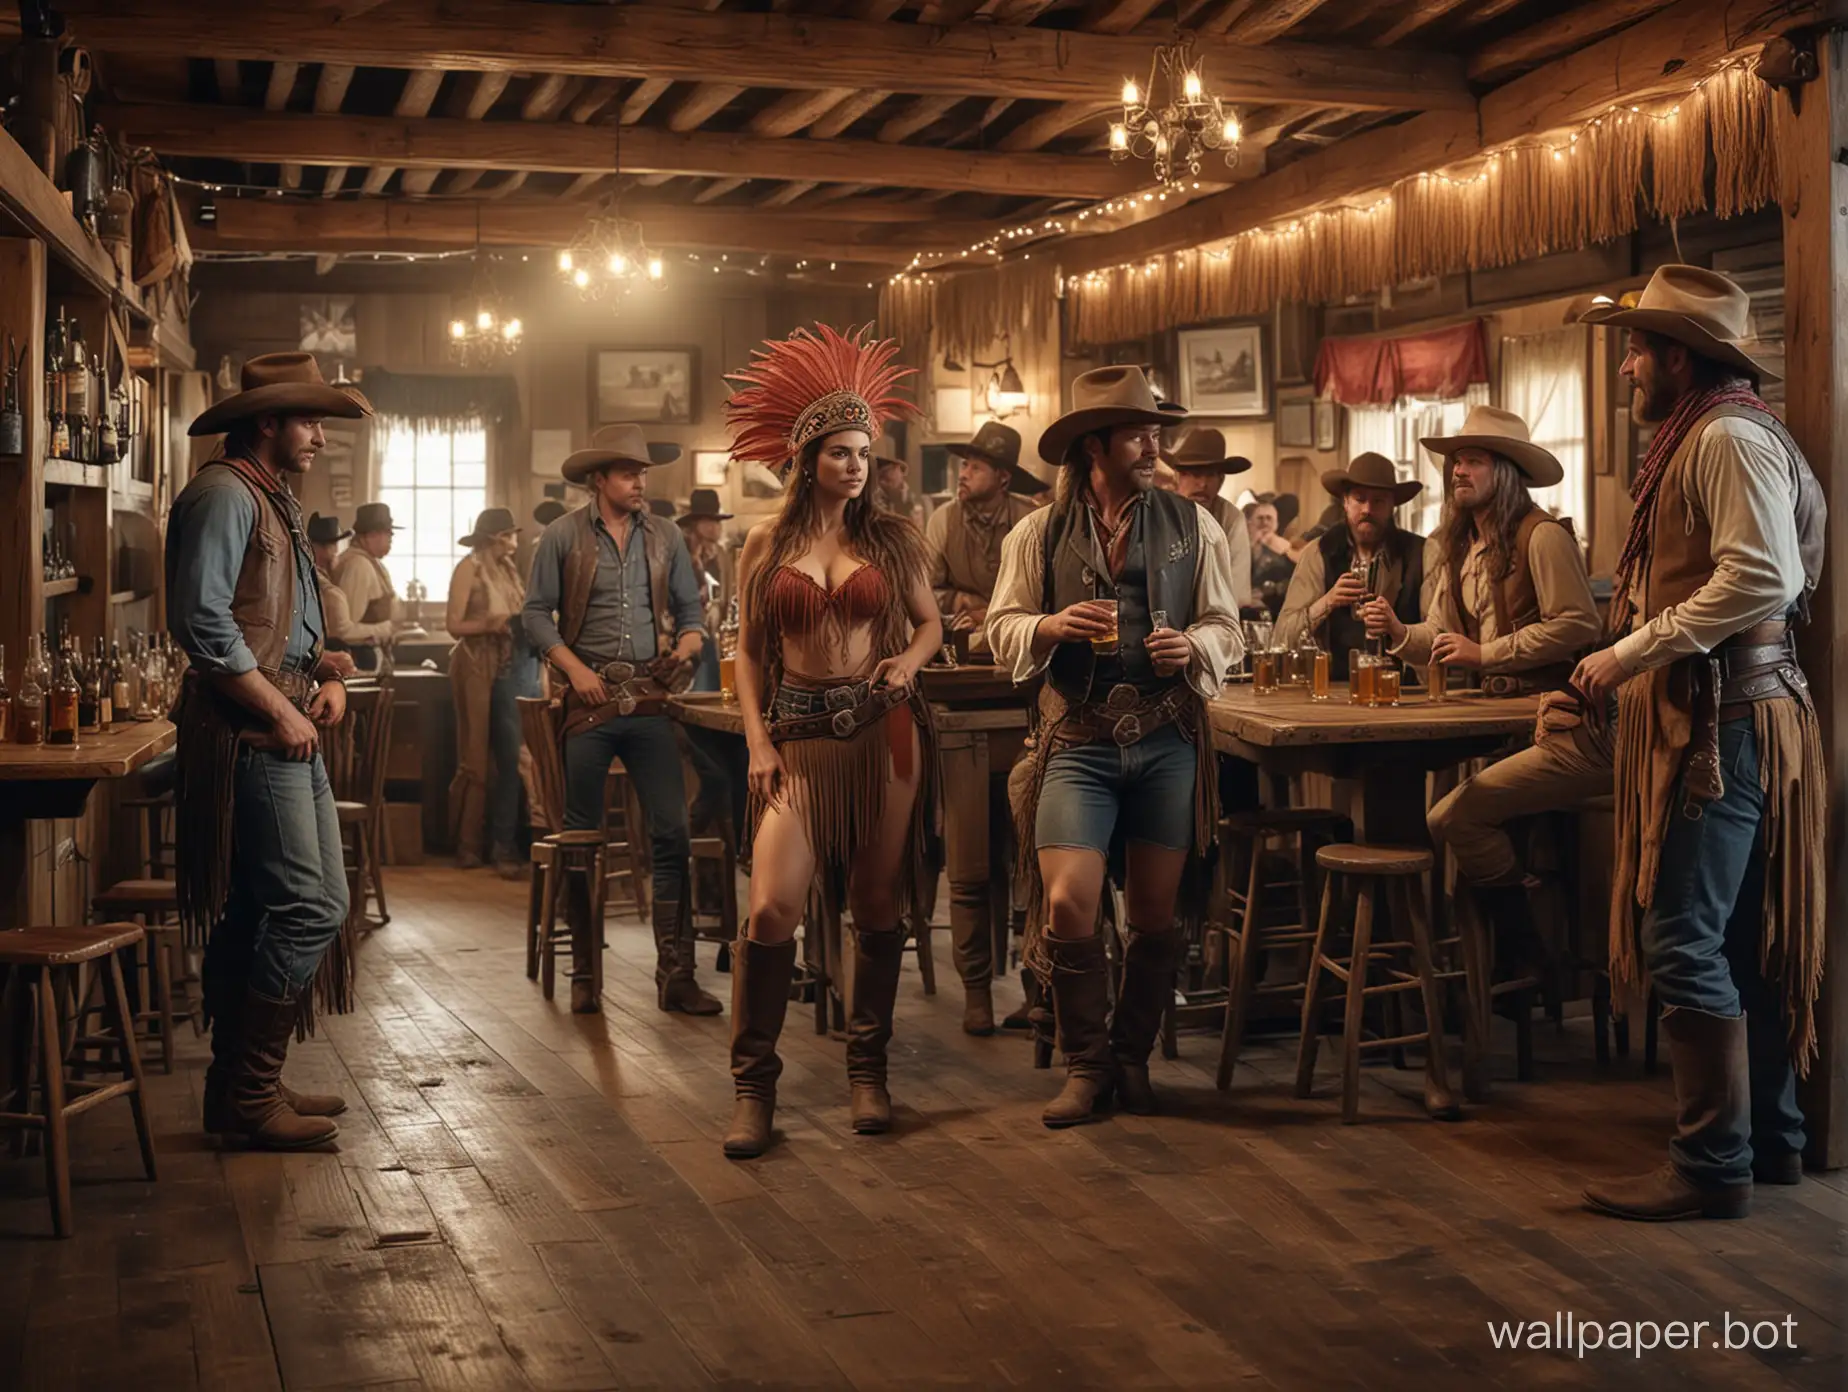 Wild-West-Cowboys-Gathered-in-Saloon-for-Lively-Conversations-and-Entertainment